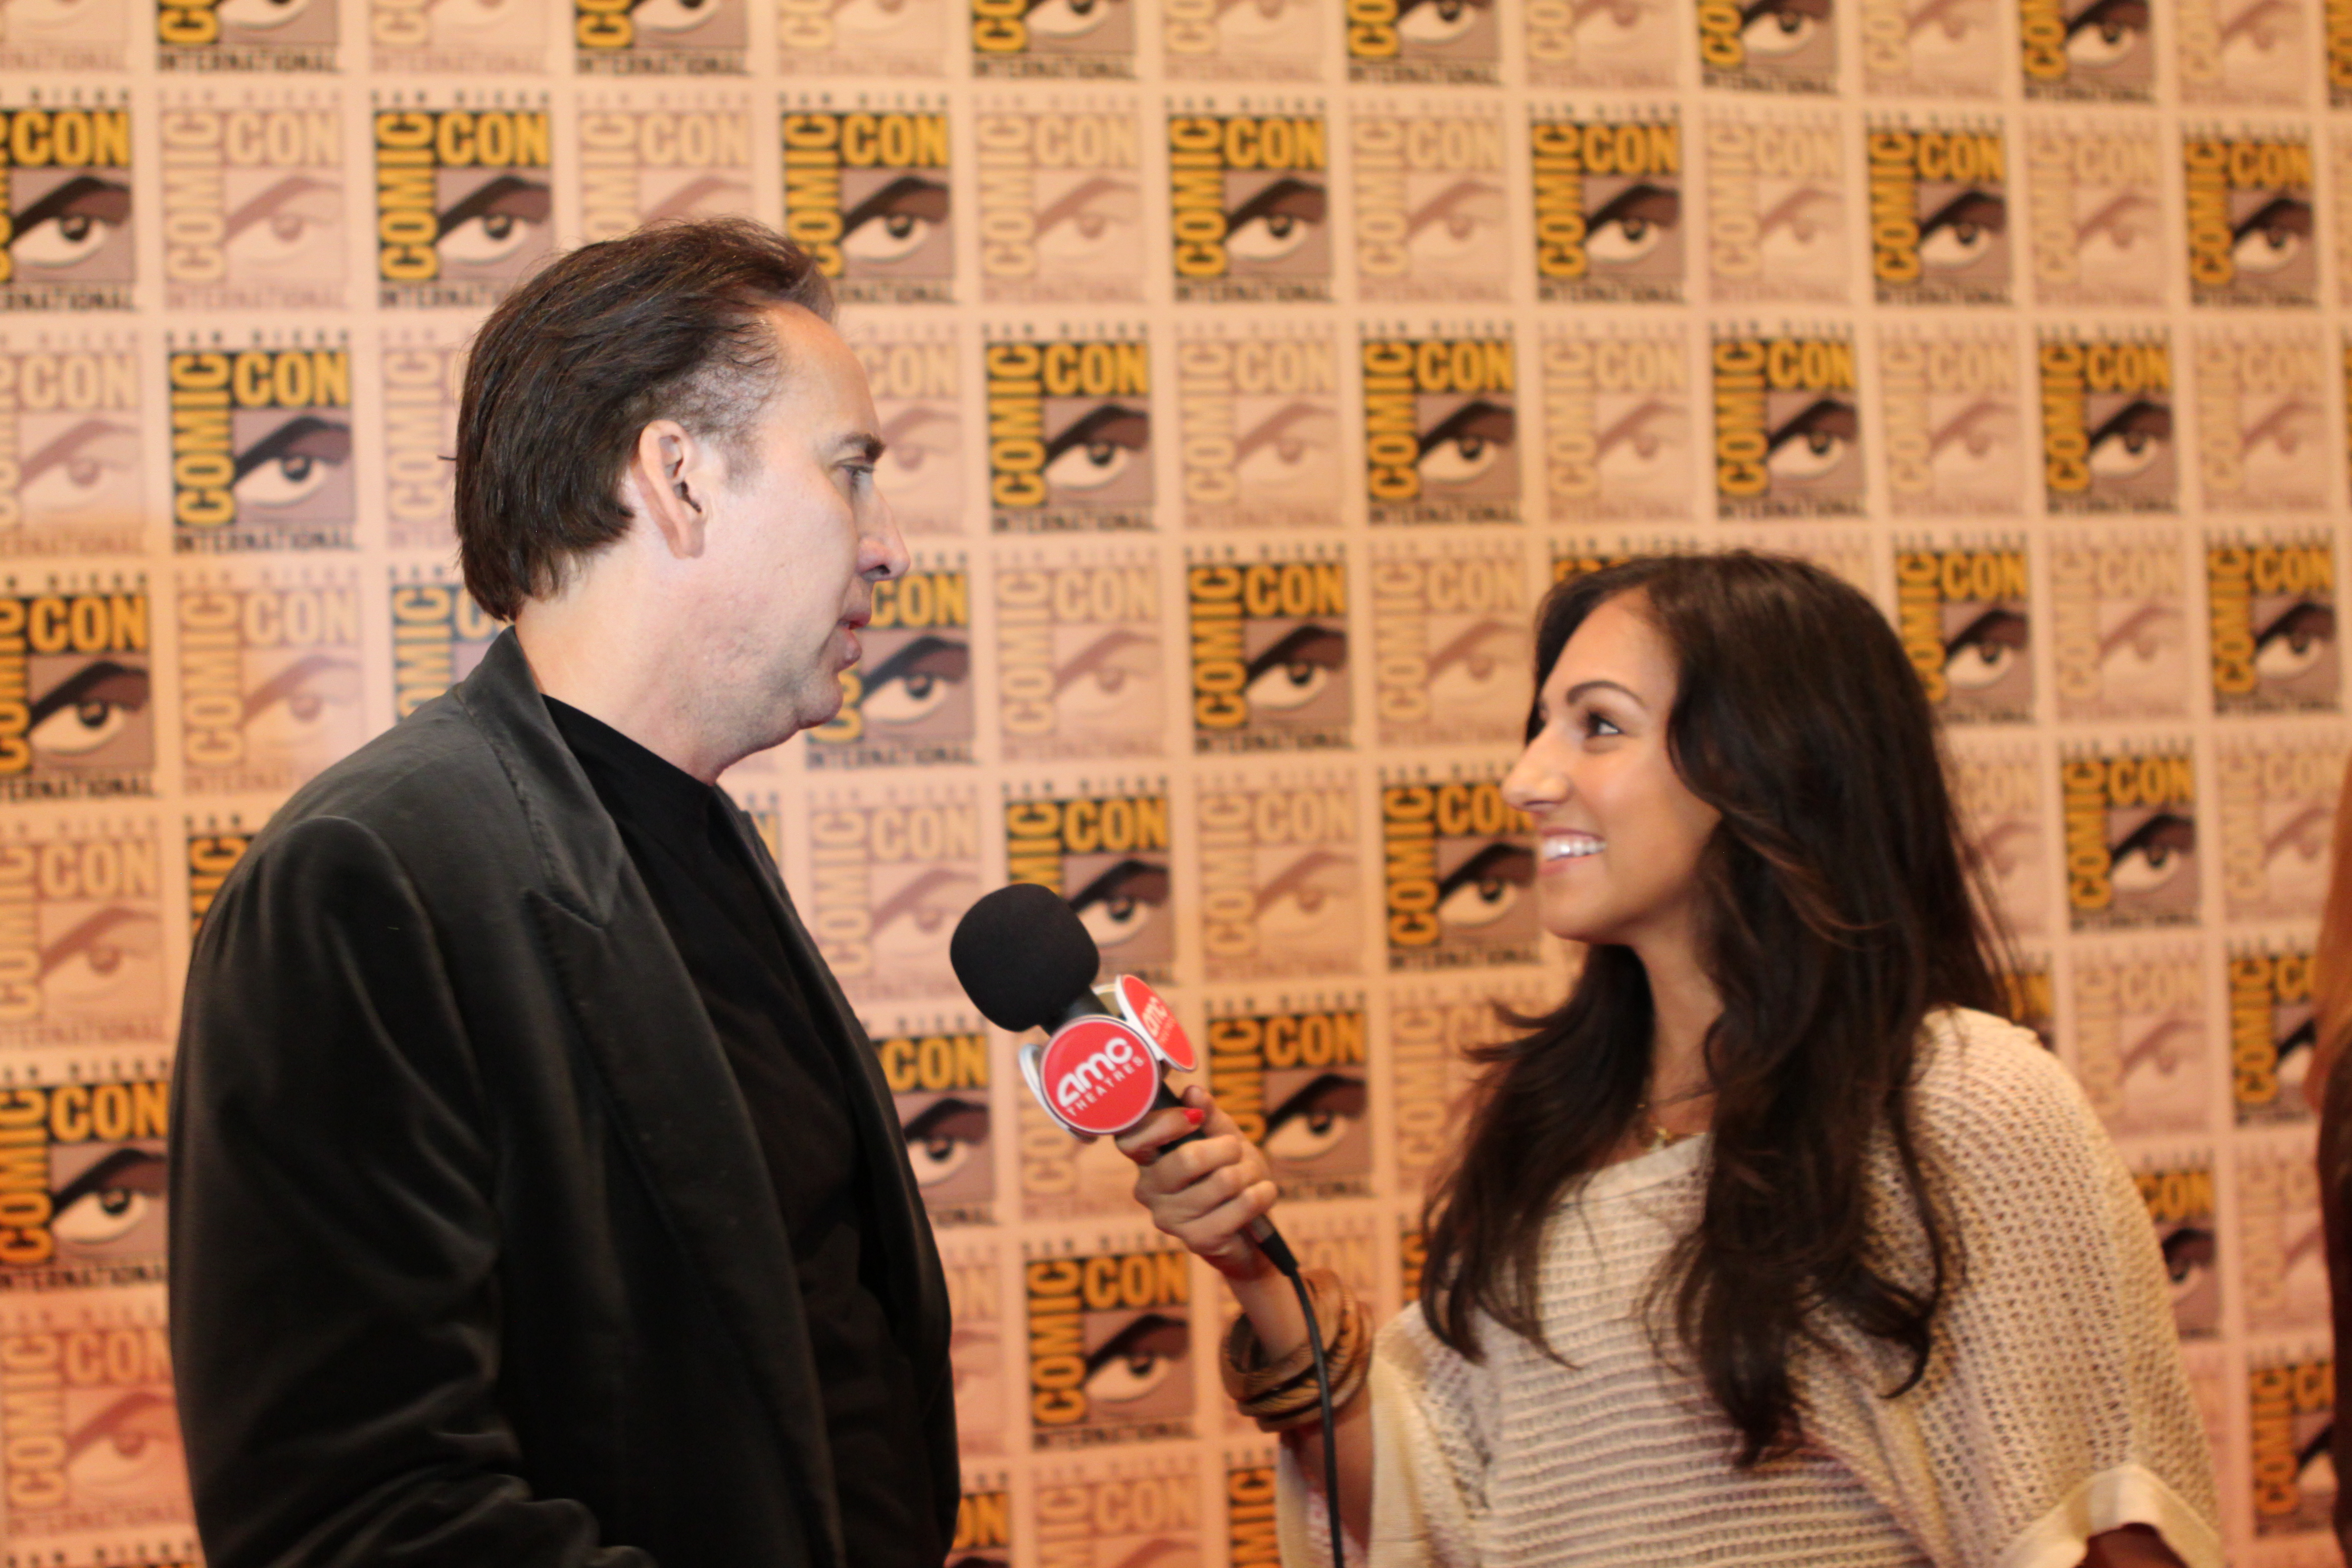 Amber Valdez covers 2011 Comic Convention, San Diego CA pictured here with Nicholas Cage for AMC Theatres